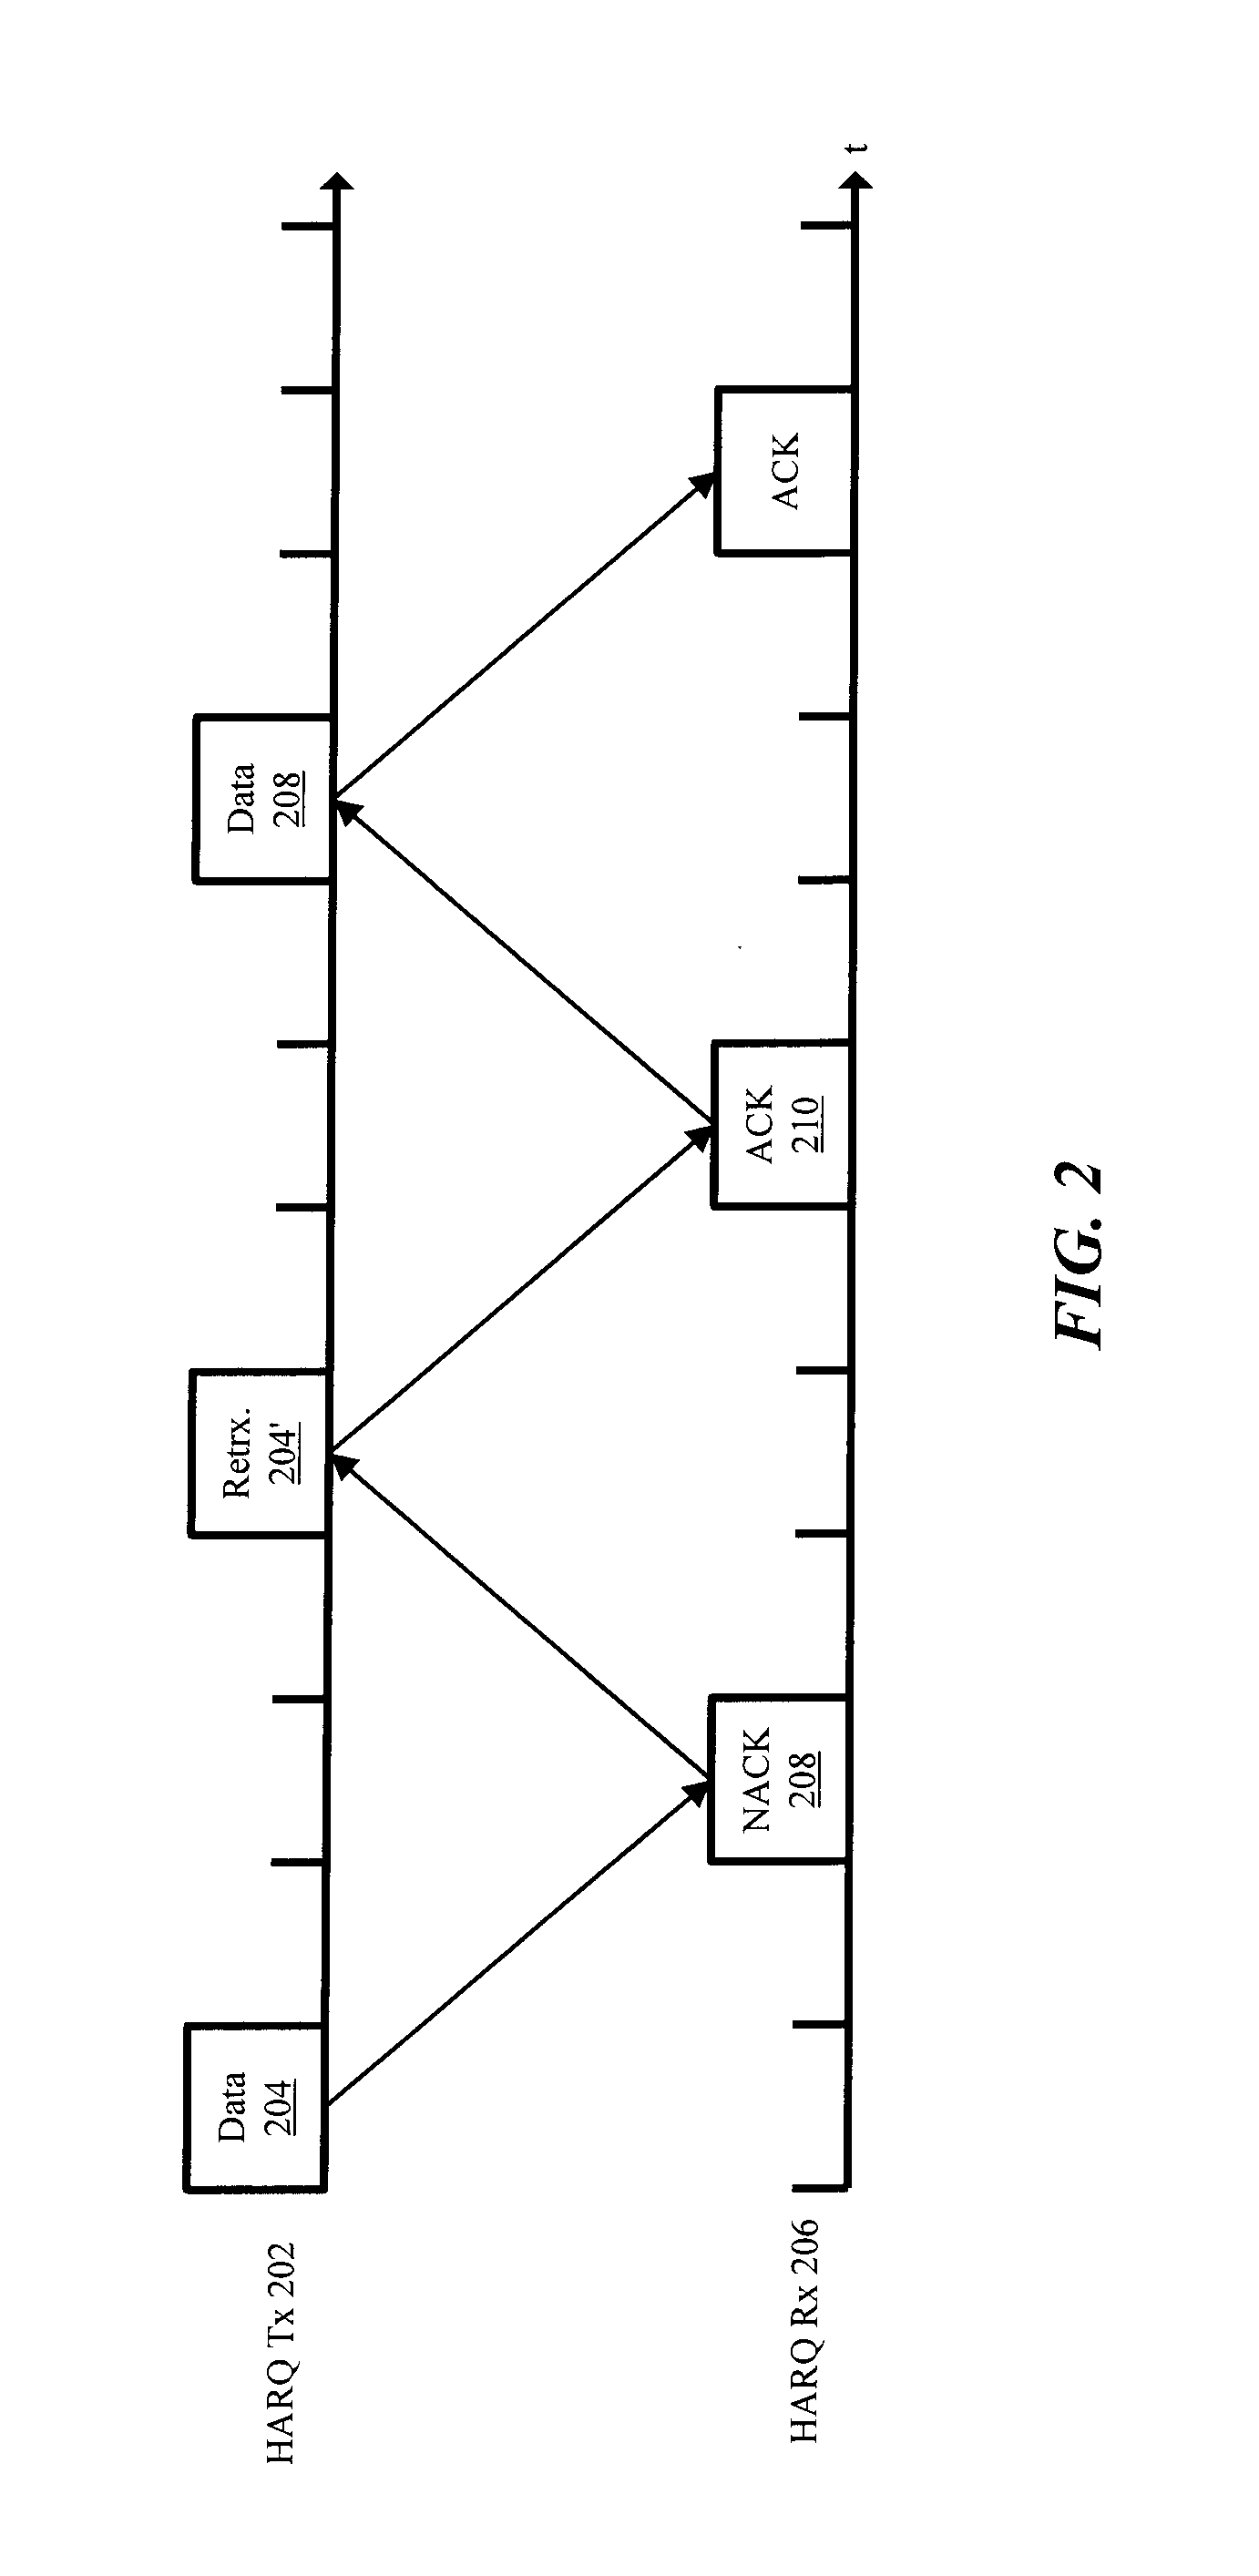 Method for operation of synchronous HARQ in a wireless communication system